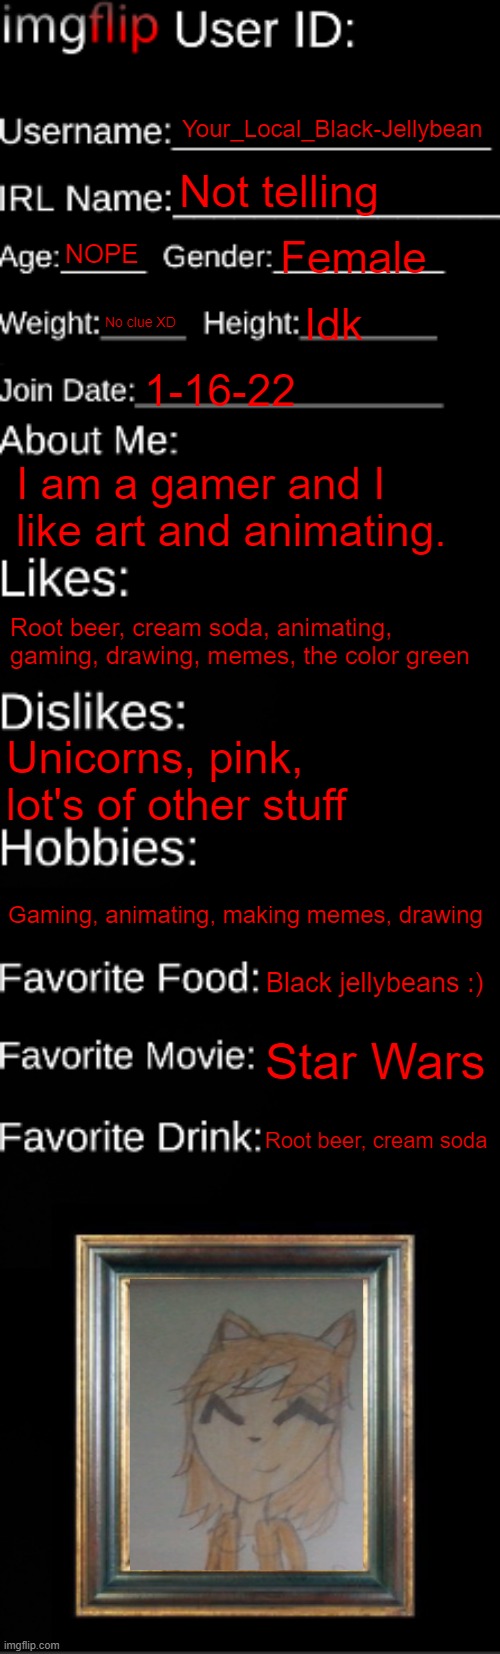 About meh :D | Your_Local_Black-Jellybean; Not telling; NOPE; Female; No clue XD; Idk; 1-16-22; I am a gamer and I like art and animating. Root beer, cream soda, animating, gaming, drawing, memes, the color green; Unicorns, pink, lot's of other stuff; Gaming, animating, making memes, drawing; Black jellybeans :); Star Wars; Root beer, cream soda | image tagged in imgflip id card | made w/ Imgflip meme maker